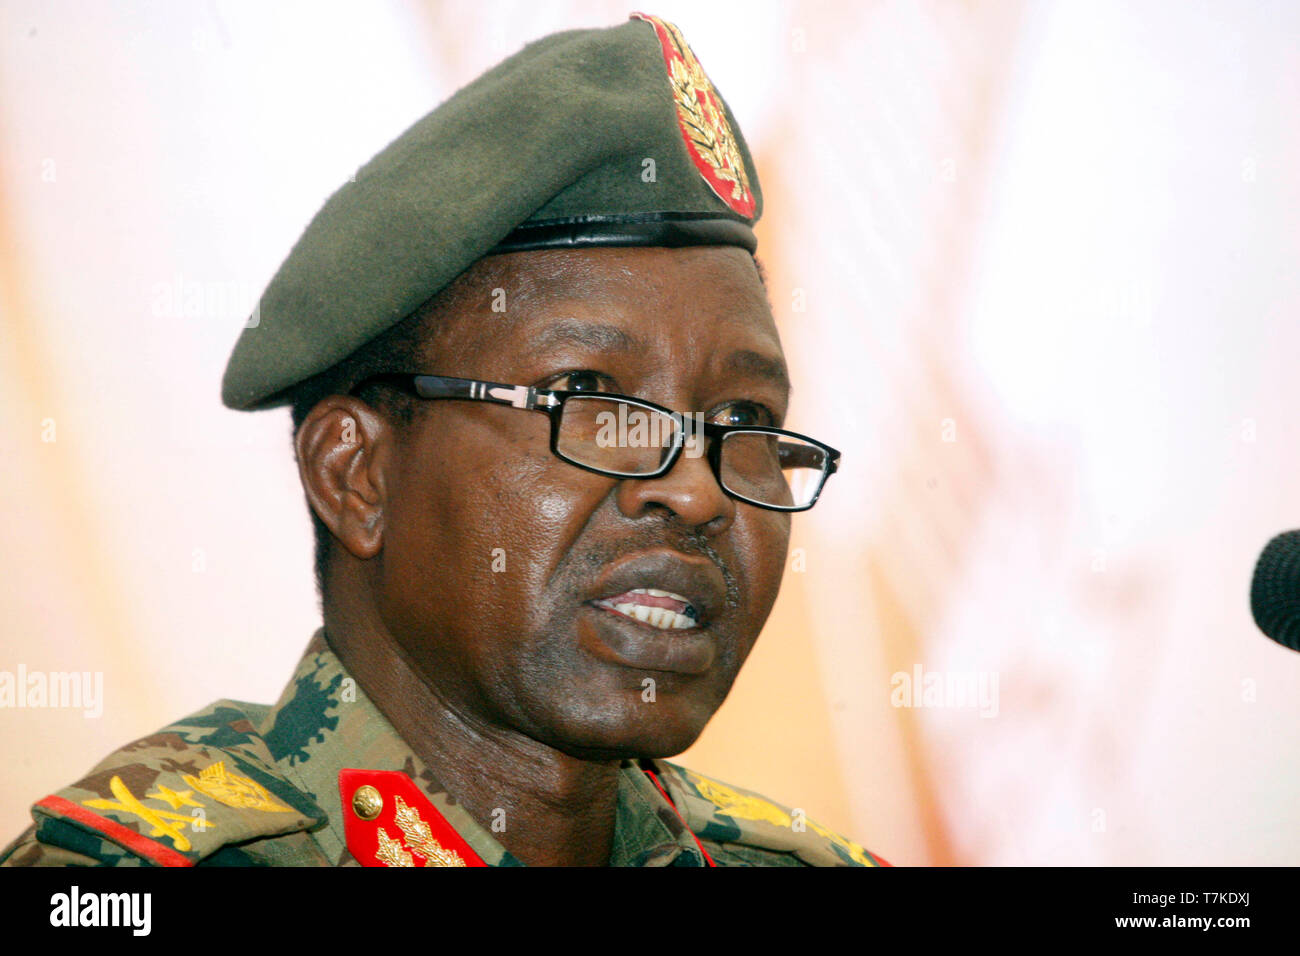 Khartoum, Sudan. 7th May, 2019. Shams-Eddin Kabashi, Sudan's Transitional Military Council (TMC) spokesman, speaks at a press conference in Khartoum, Sudan, May 7, 2019. Sudan's TMC on Tuesday announced that it has agreed with major opposition forces on the general structure of rule during the transitional period. Credit: Mohamed Khidir/Xinhua/Alamy Live News Stock Photo